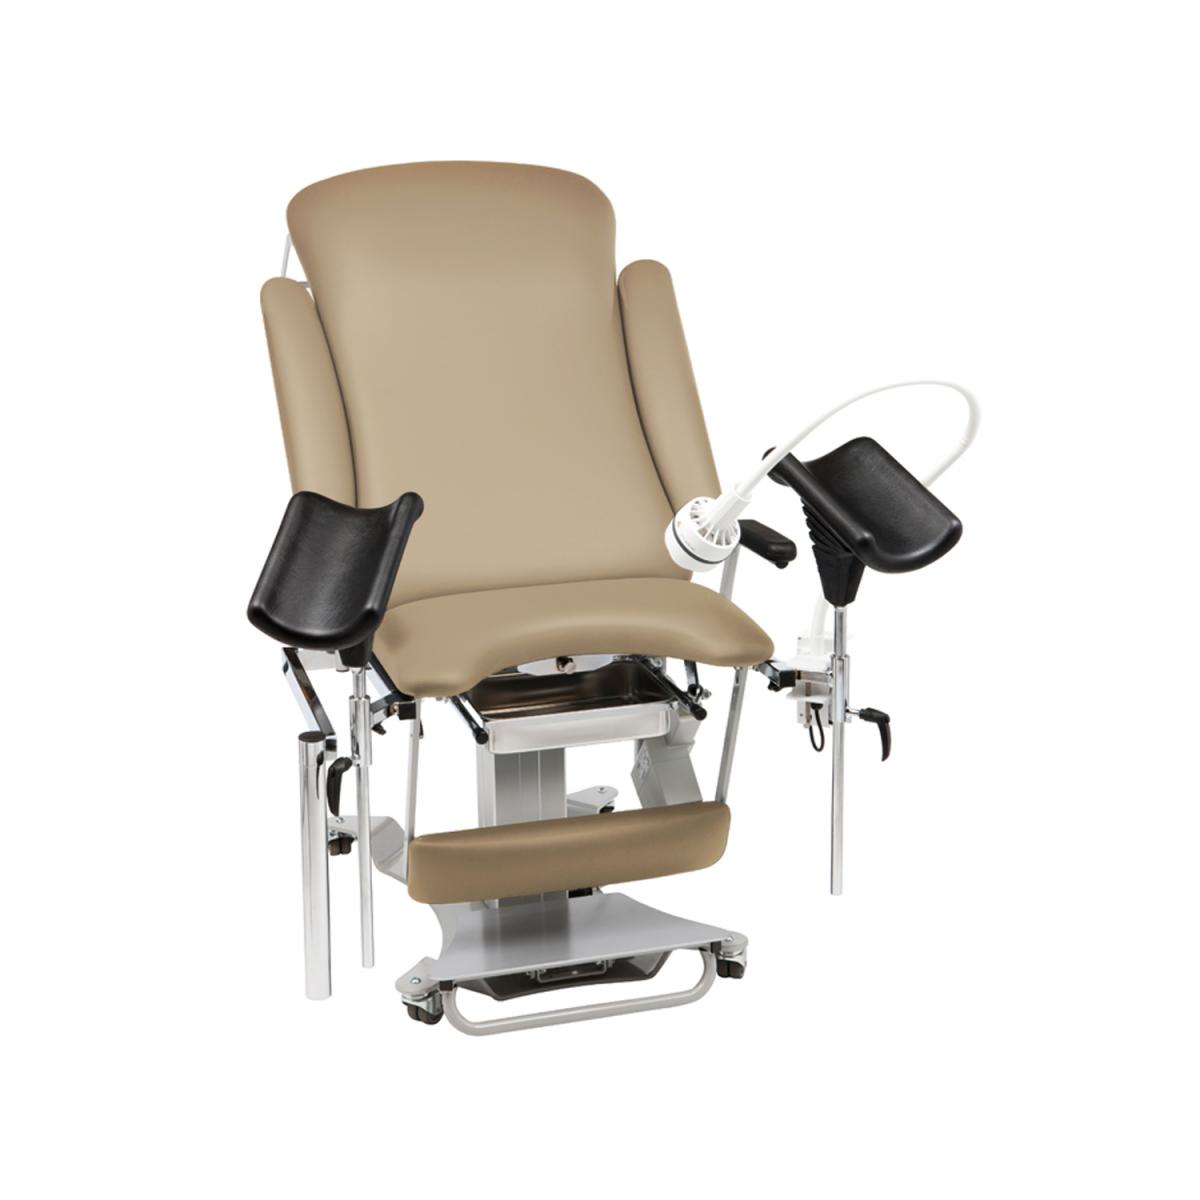 Gynaecological examination chair 480